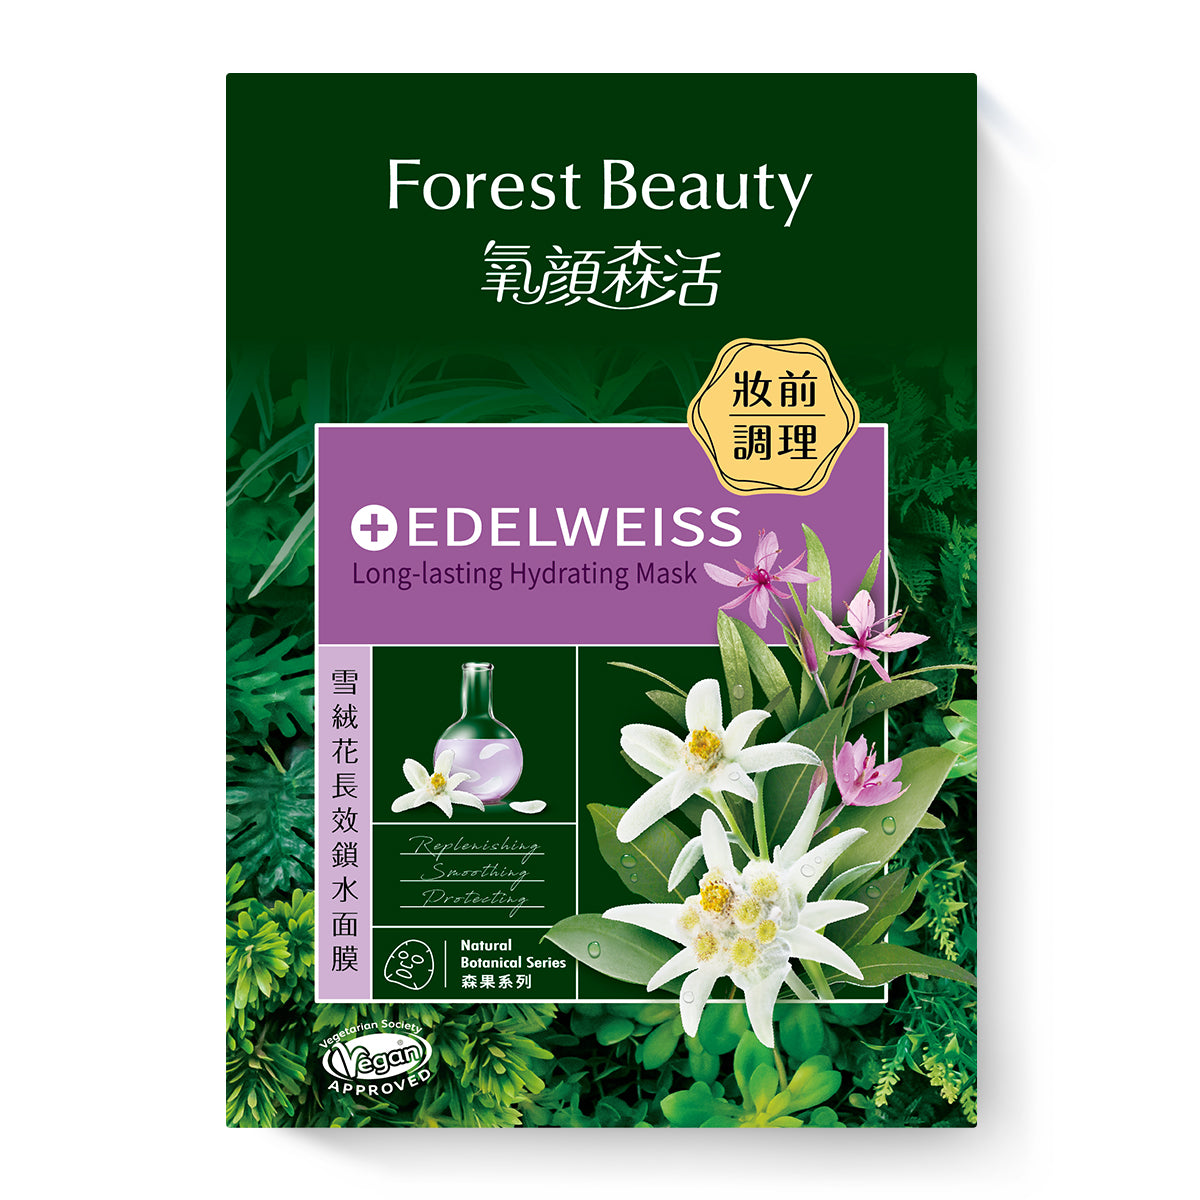 Forest Beauty Edelweiss Long-Lasting Hydrating Mask - ShopChuusi